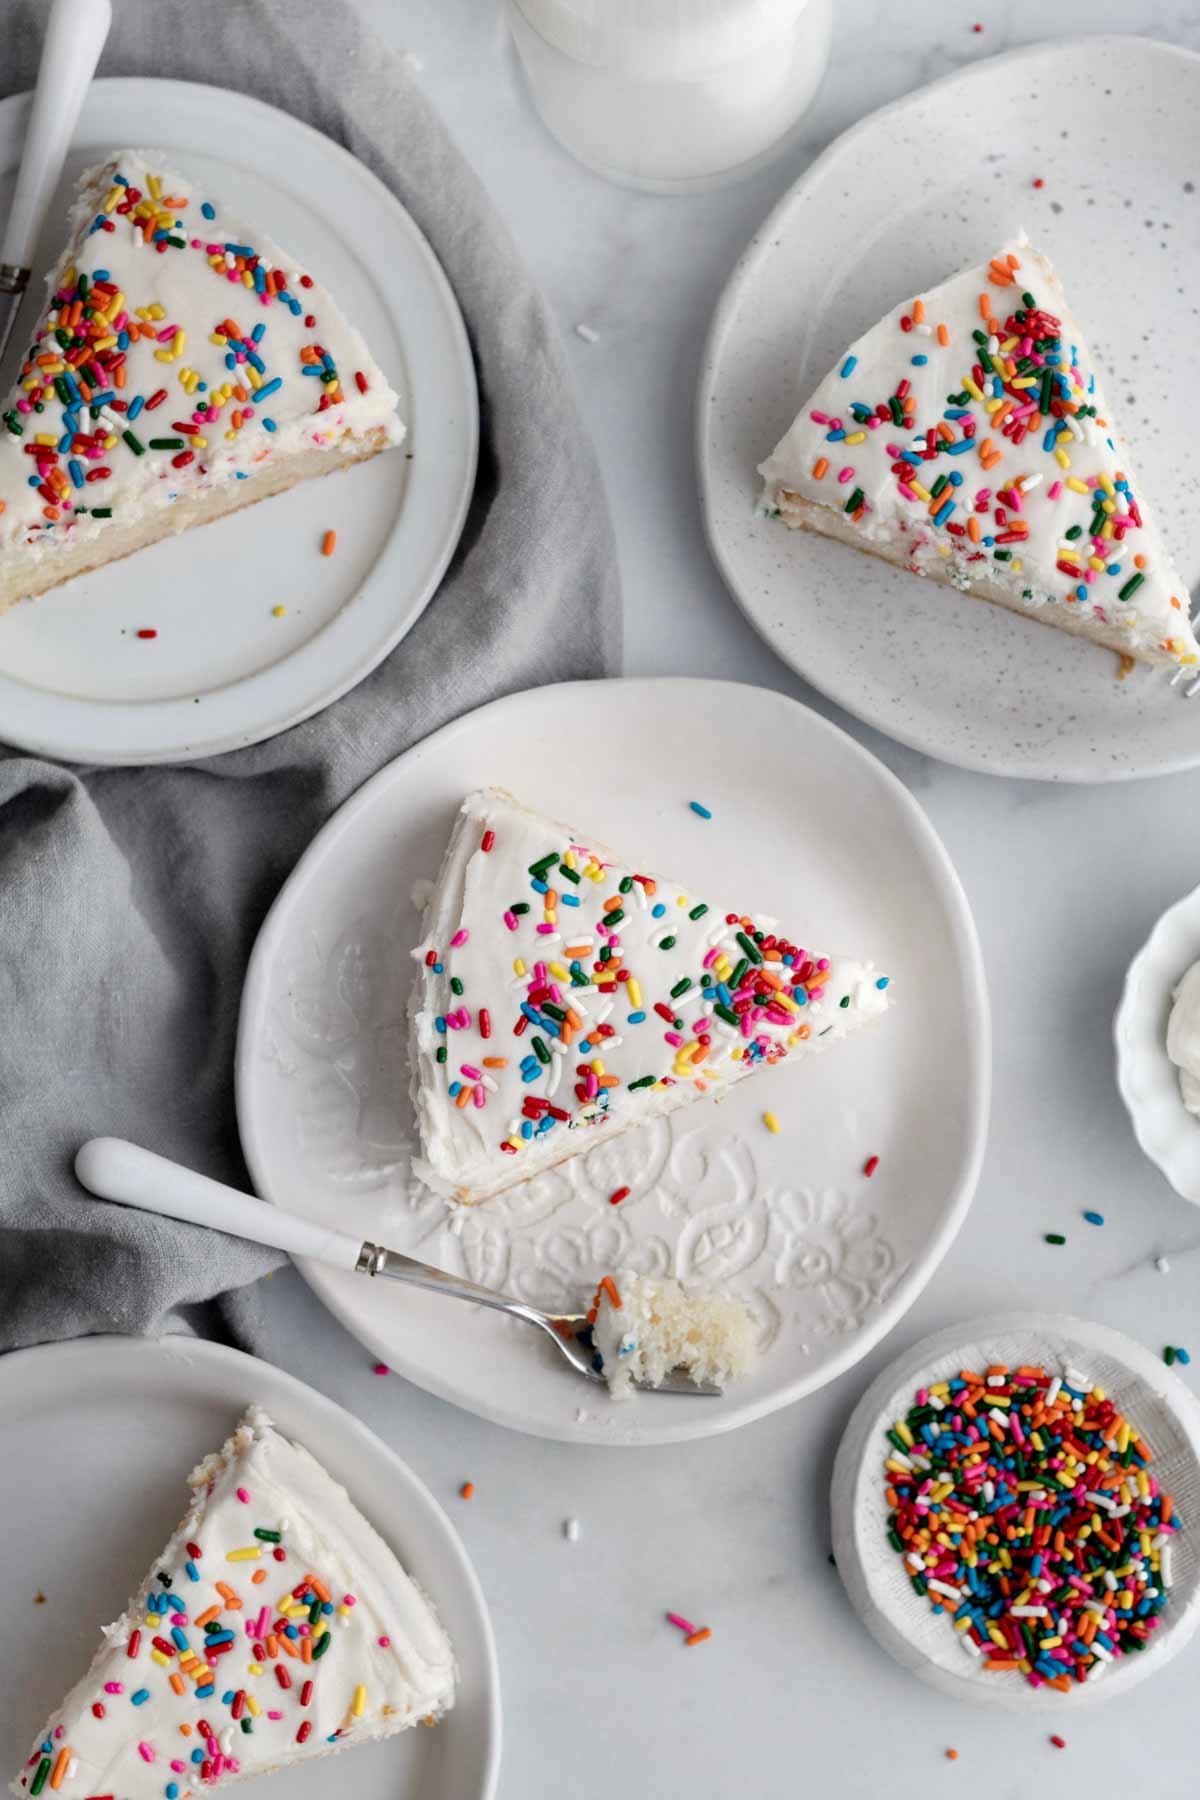 Four slices of cake on separate plates topped with rainbow sprinkles.